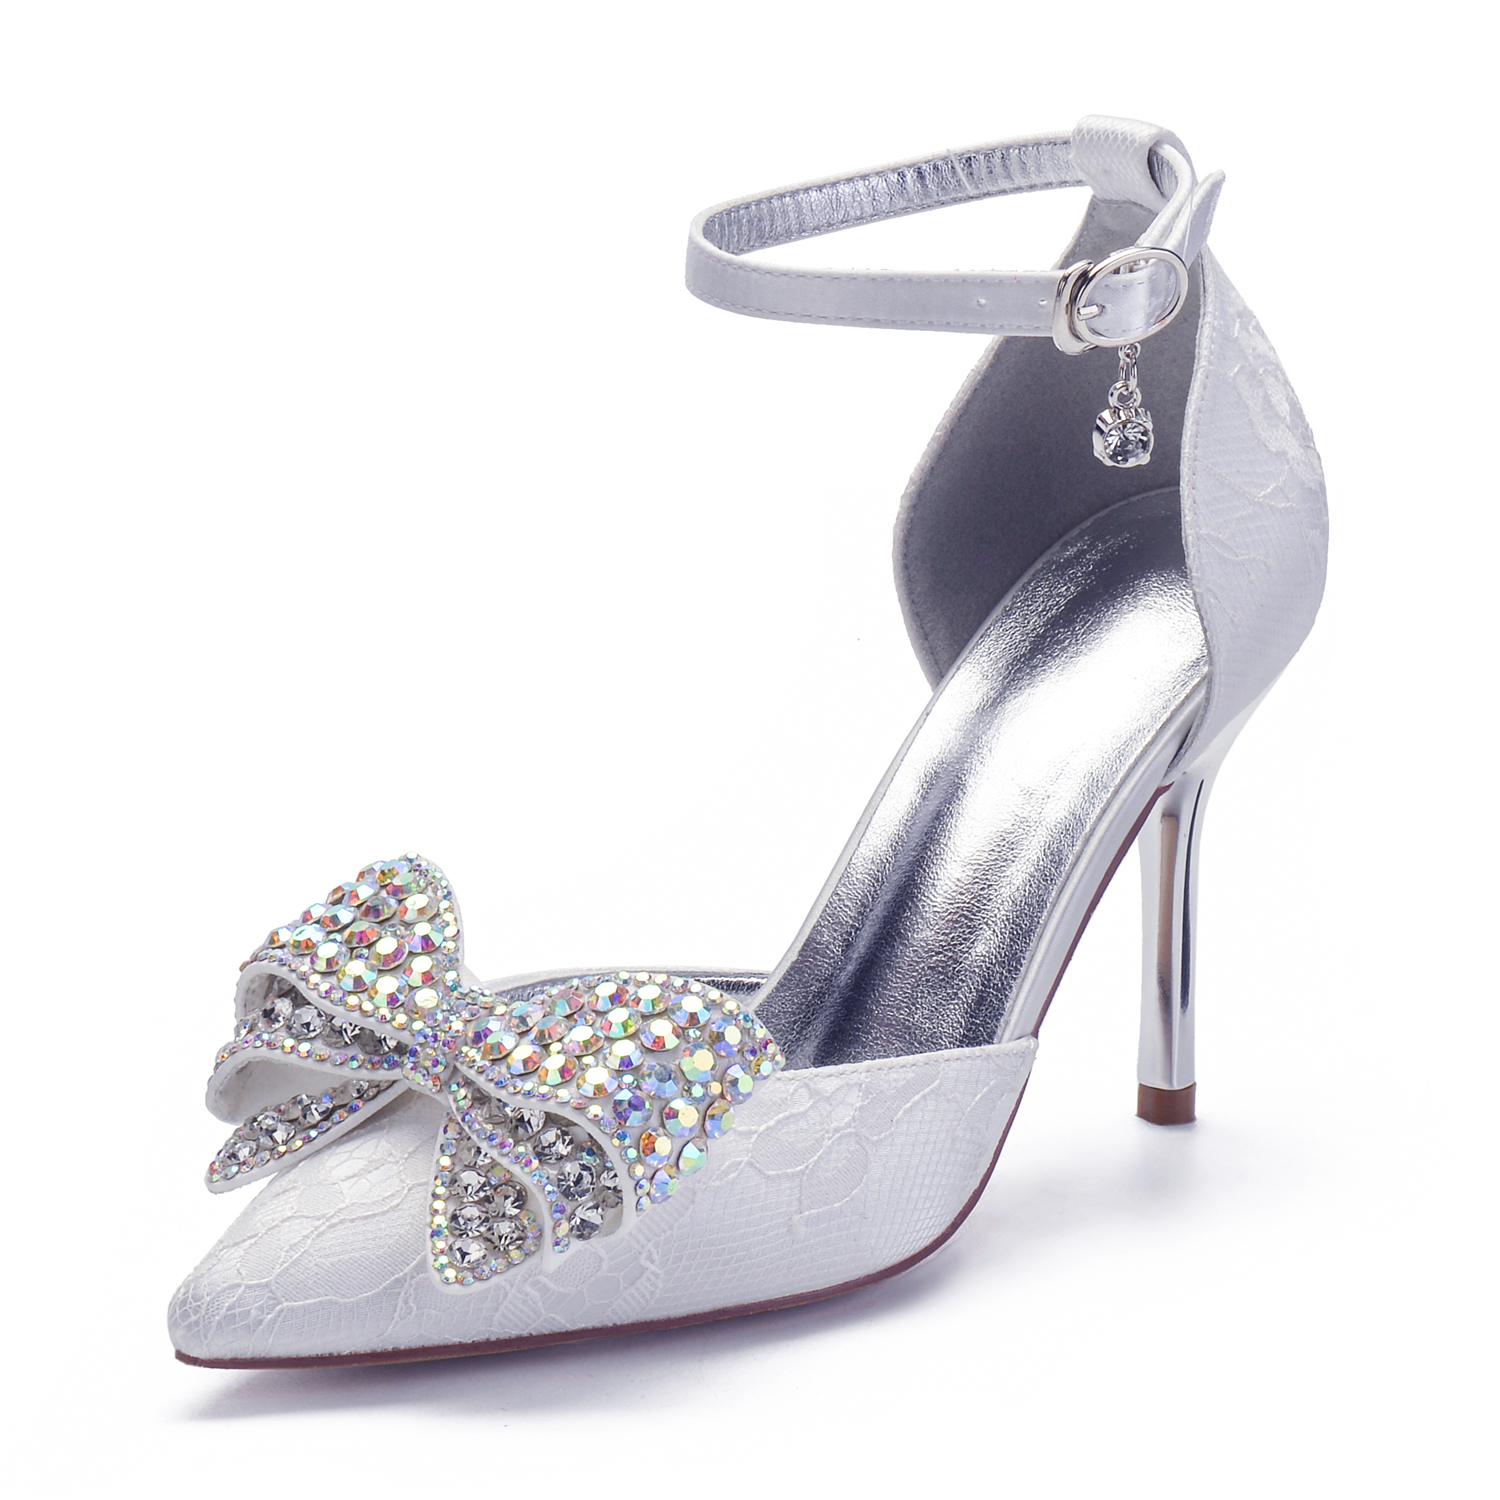 Sweet bridal wedding shoes pointed toe ankle strap high heels with big crystal bow D'orsay lady lace pumps white ivory prom heel